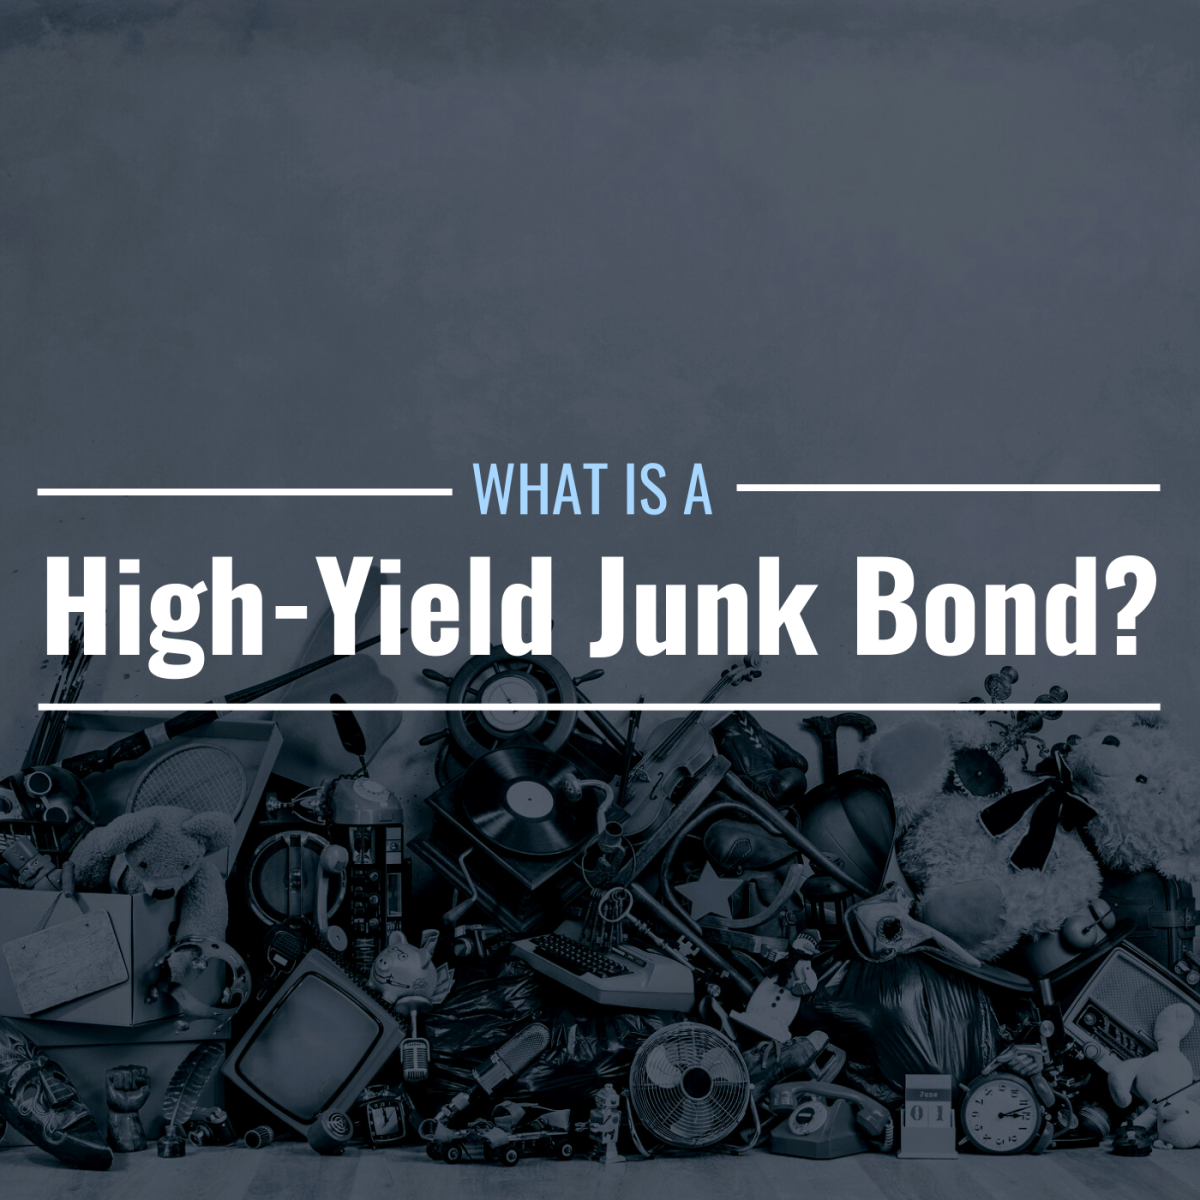 Image of a pile of junk with text overlay: "What Is a High-Yield Junk Bond?"